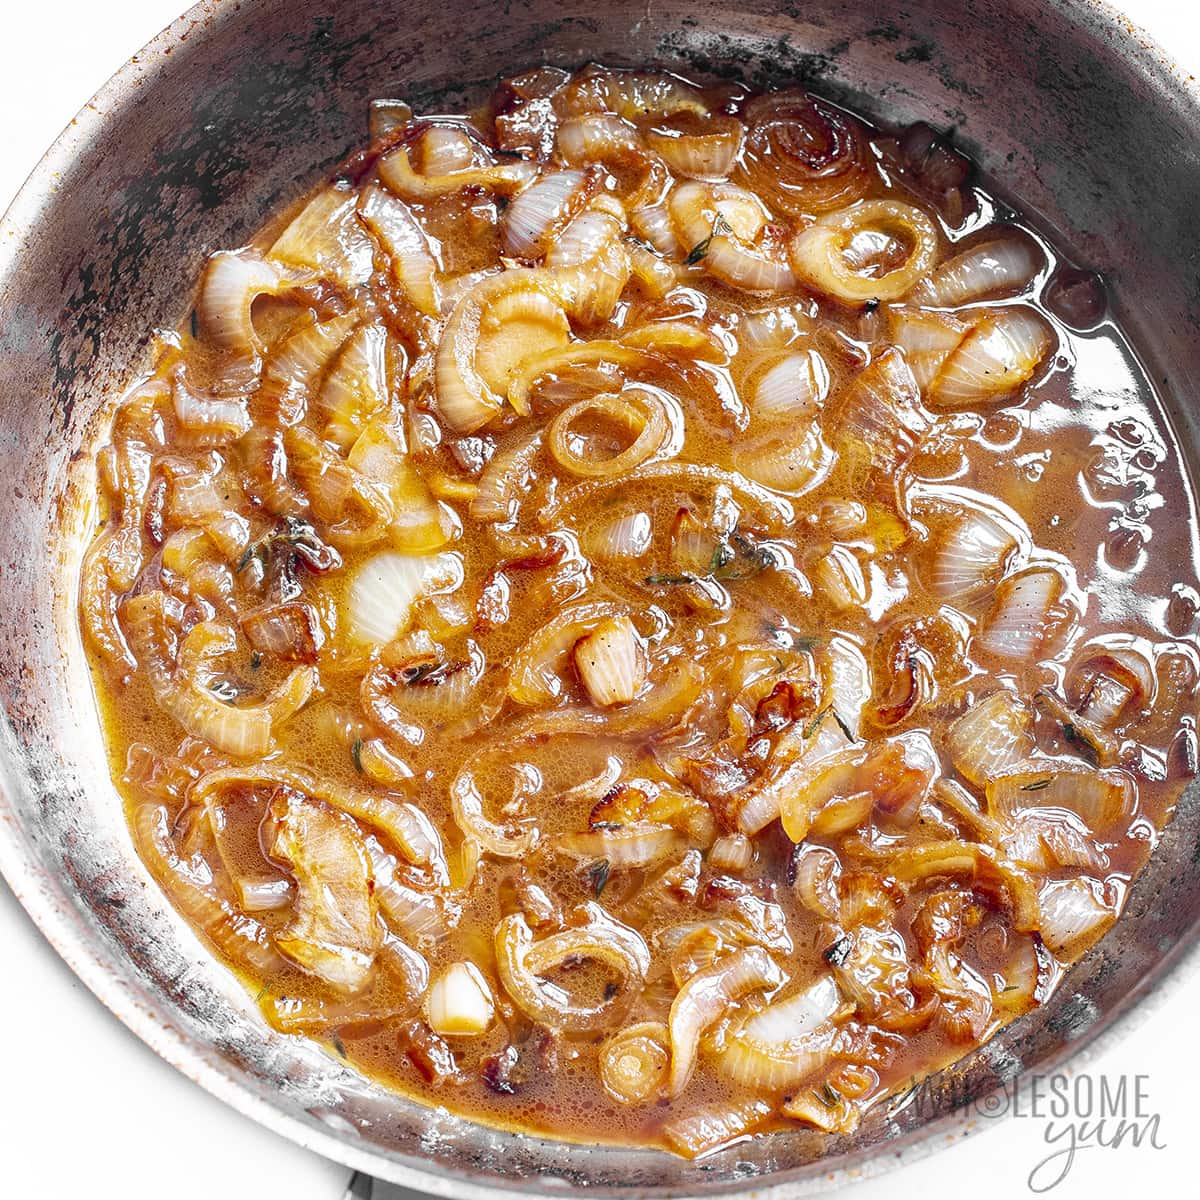 Caramelize the onions completely in a saucepan with the broth and white wine.